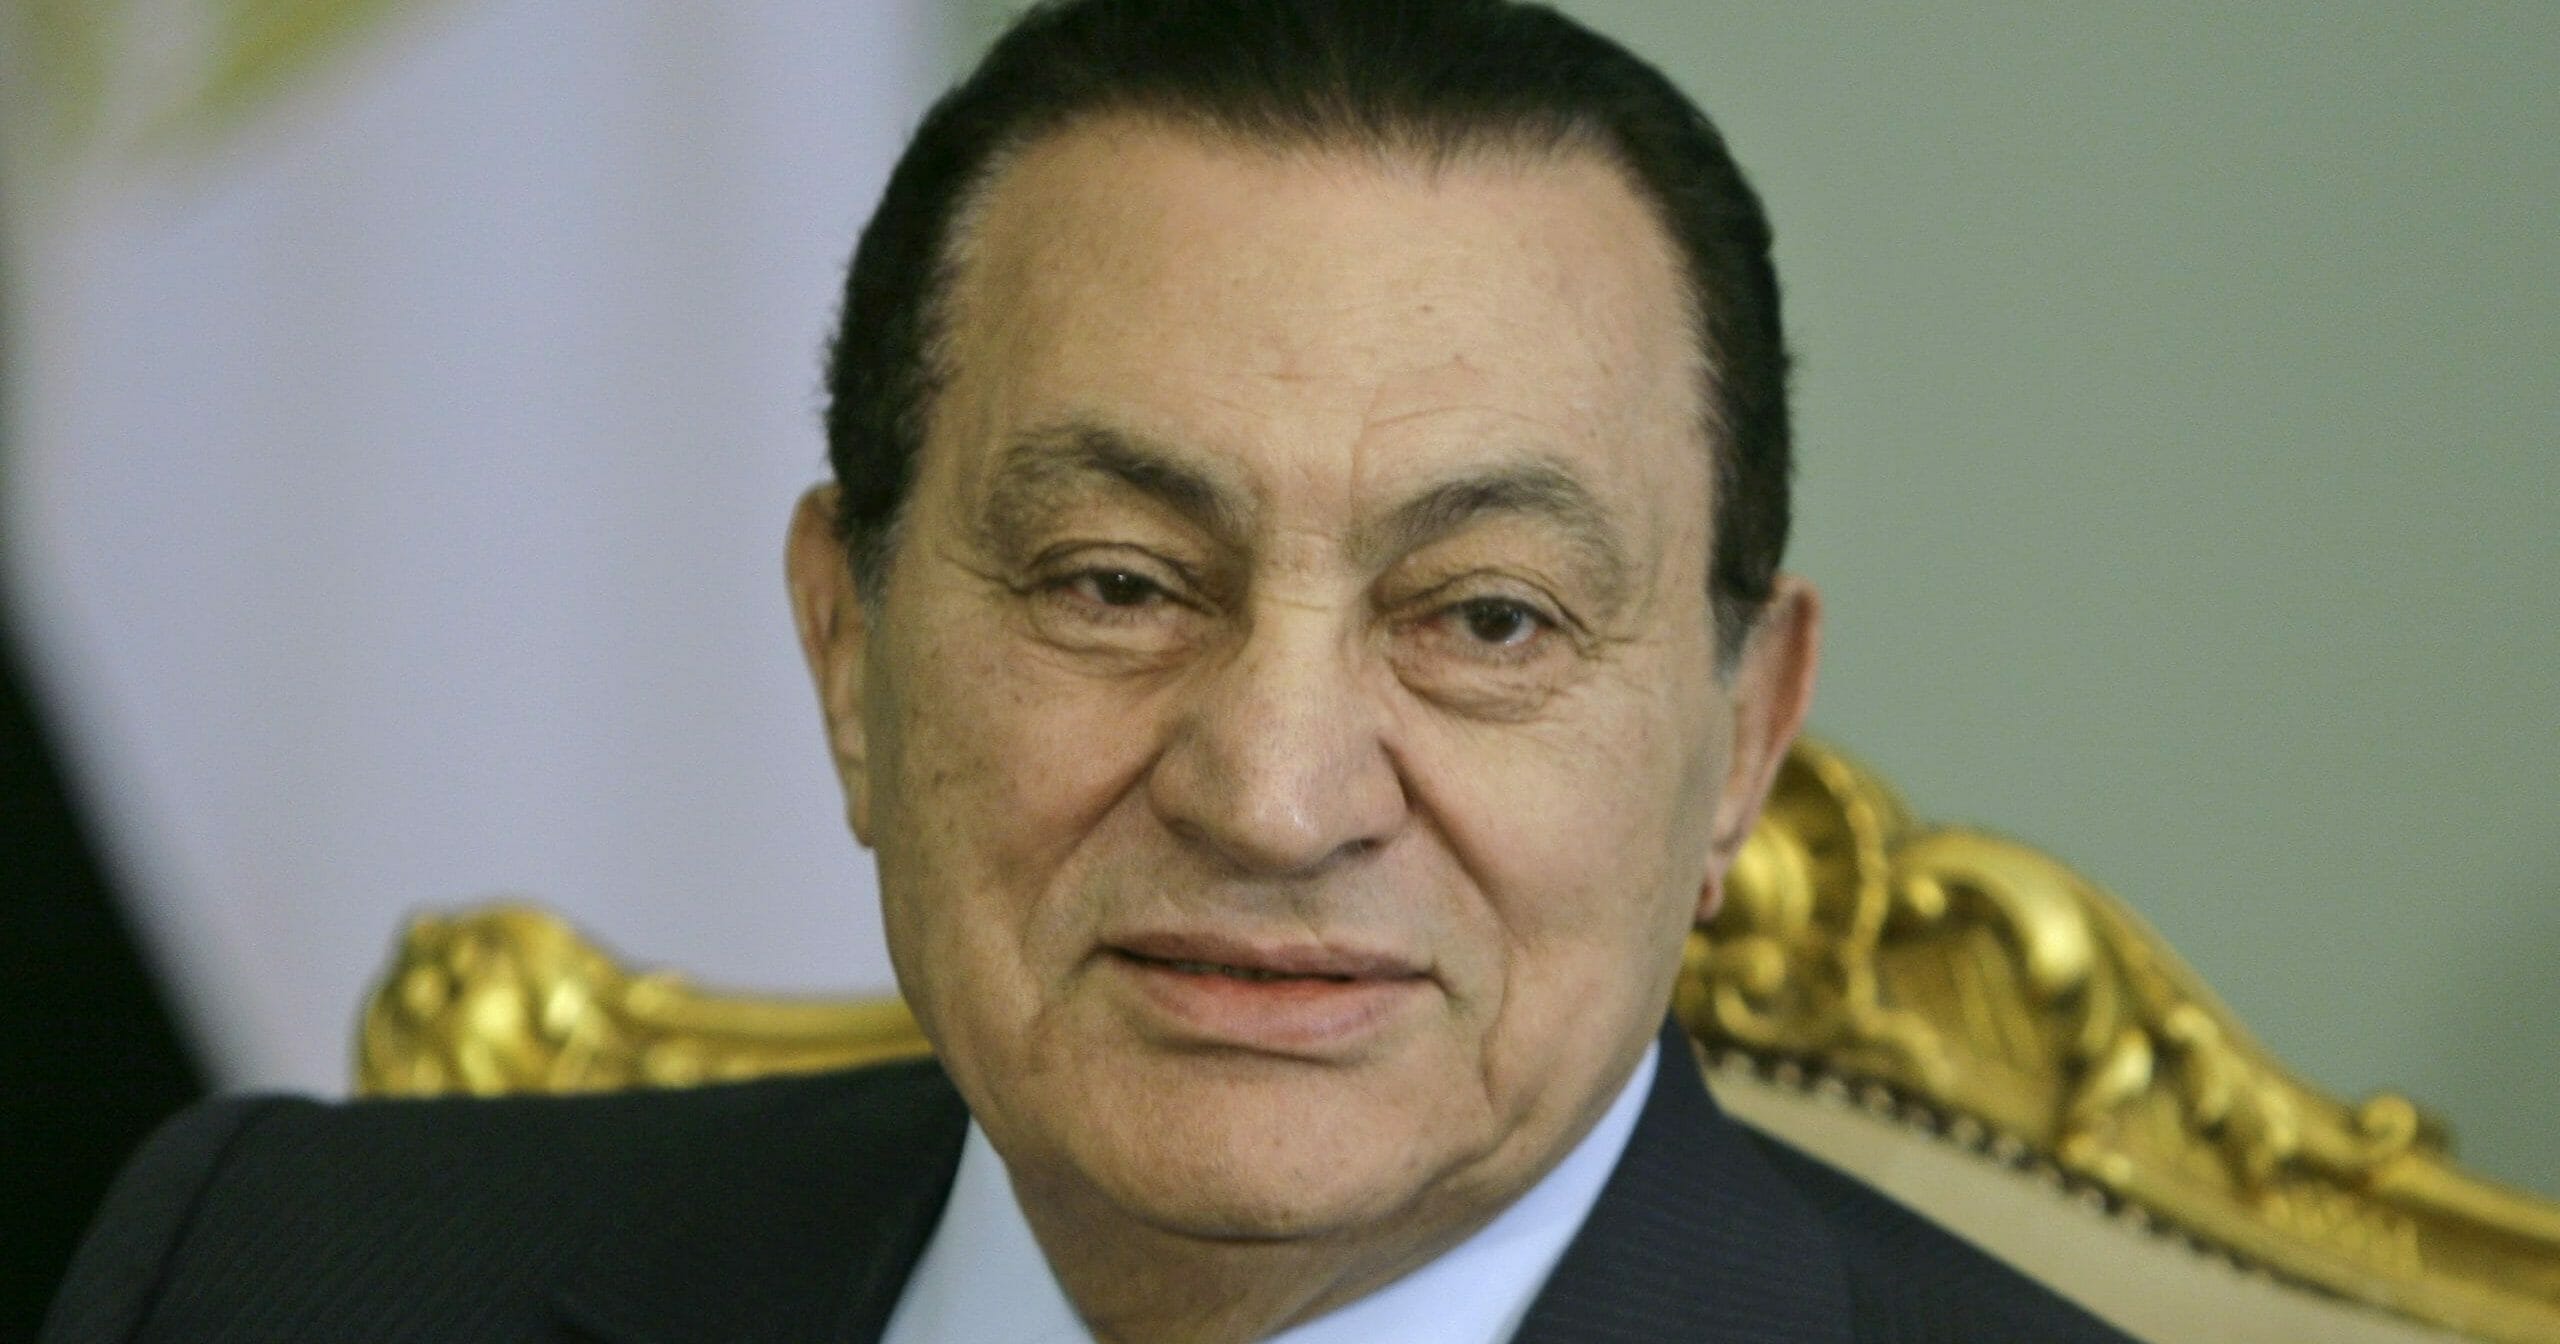 Hosni Mubarak attends a meeting at the presidential palace in Cairo, Egypt, on April 2, 2008